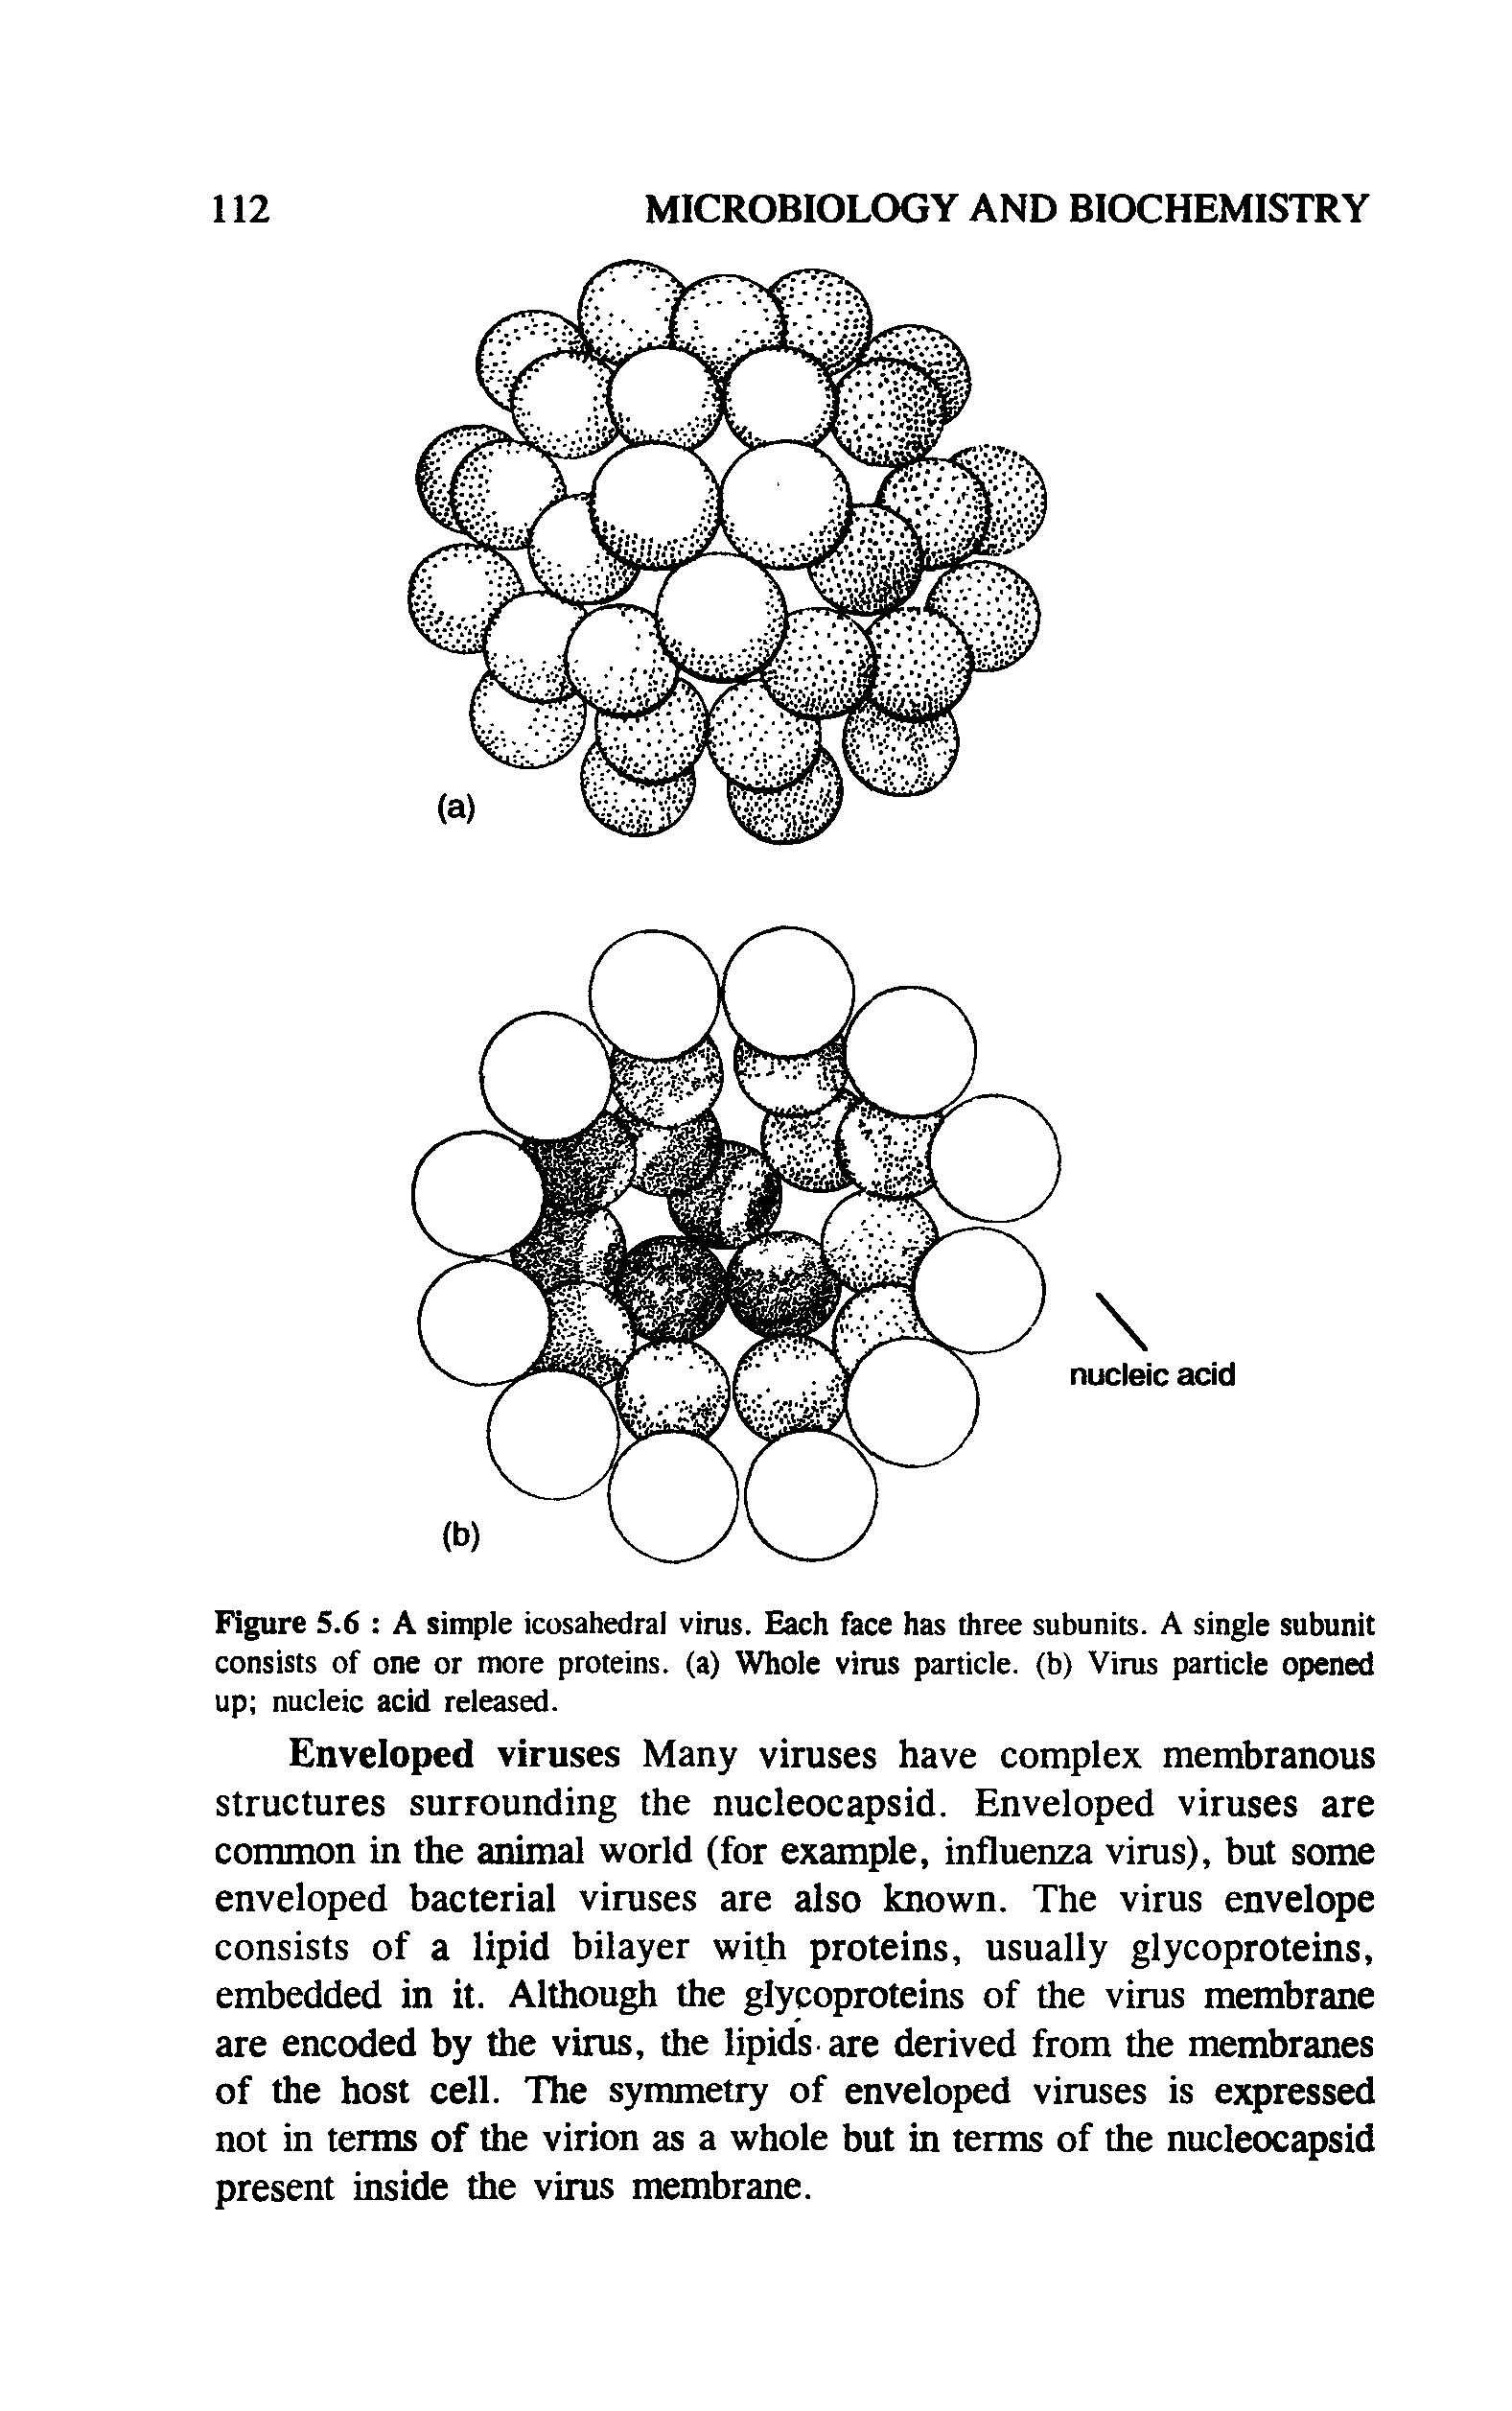 Figure 5.6 A simple icosahedral virus. Each face has three subunits. A single subunit consists of one or more proteins, (a) Whole virus particle, (b) Virus particle opened up nucleic acid released.